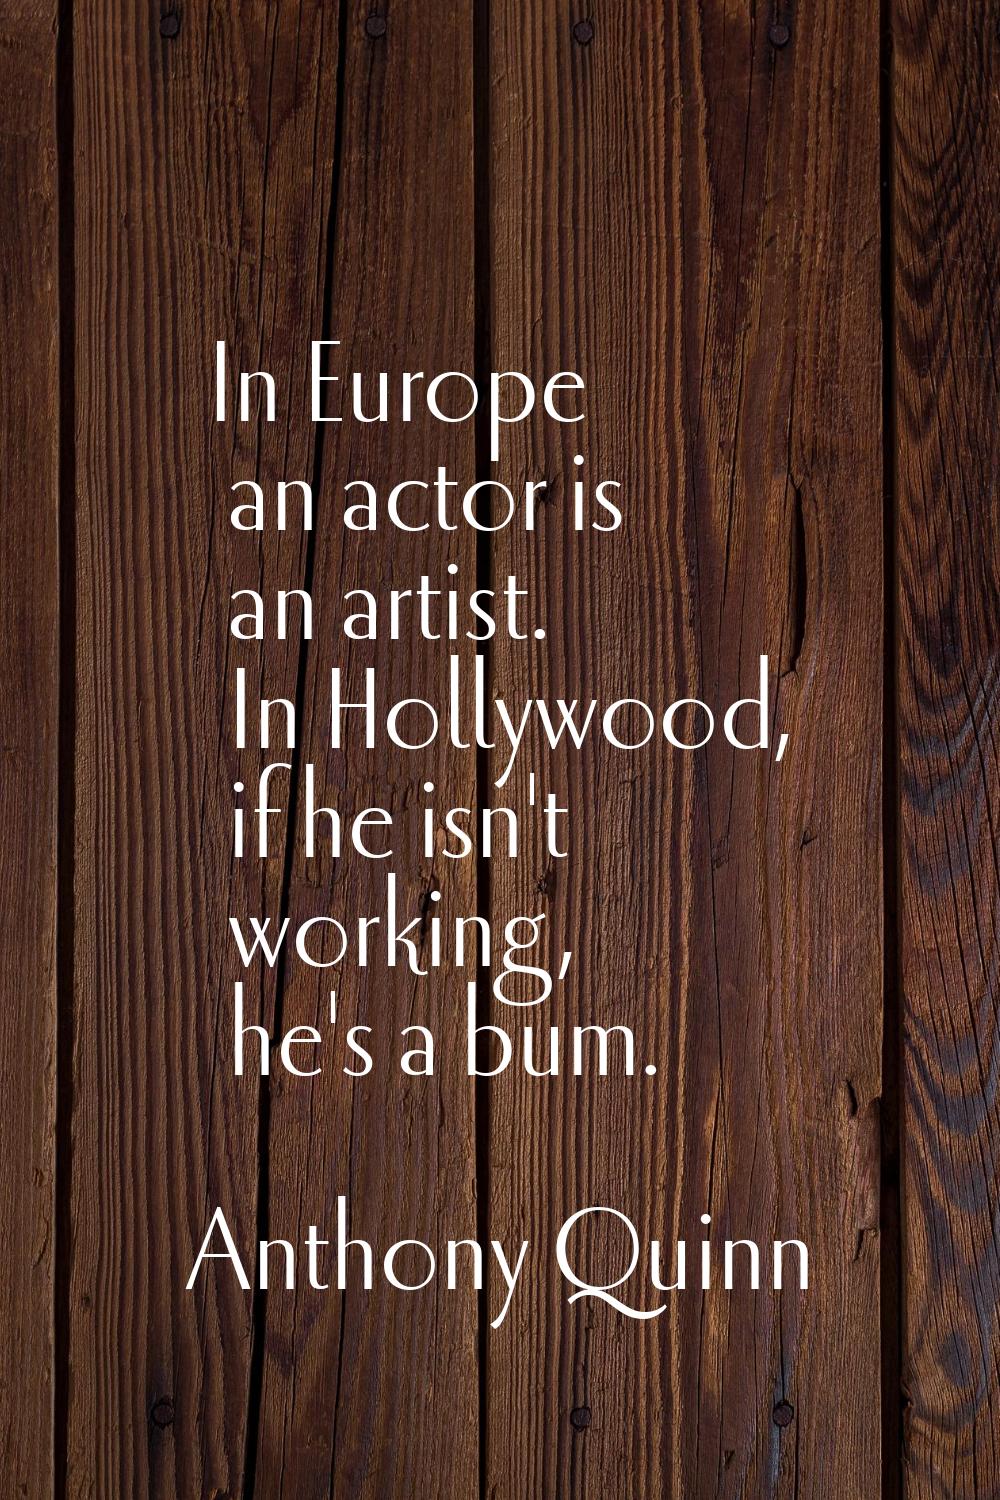 In Europe an actor is an artist. In Hollywood, if he isn't working, he's a bum.